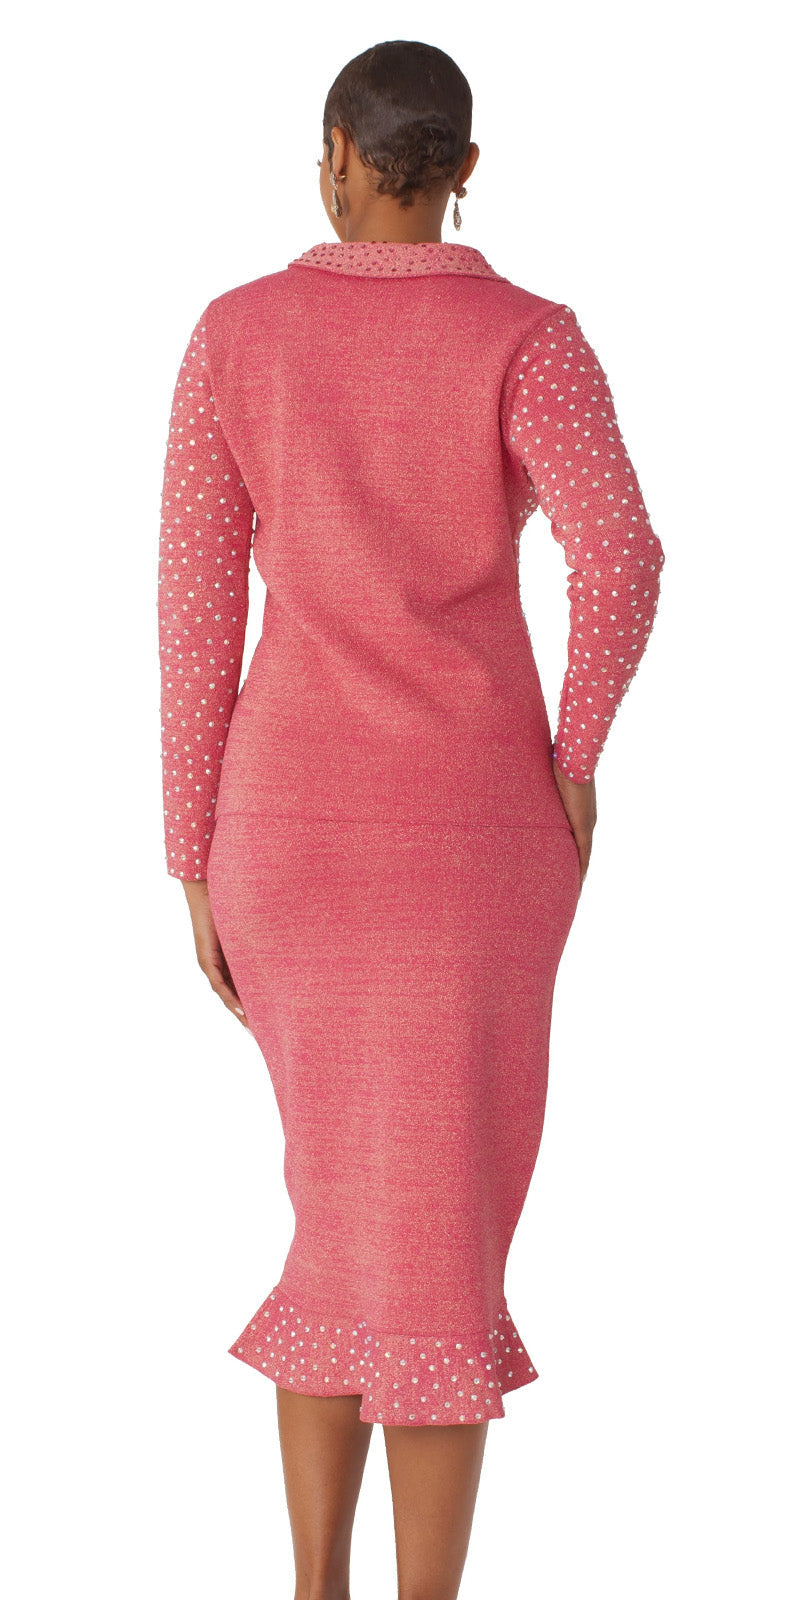 Kayla Knit Suit 5329-Fuchsia - Church Suits For Less